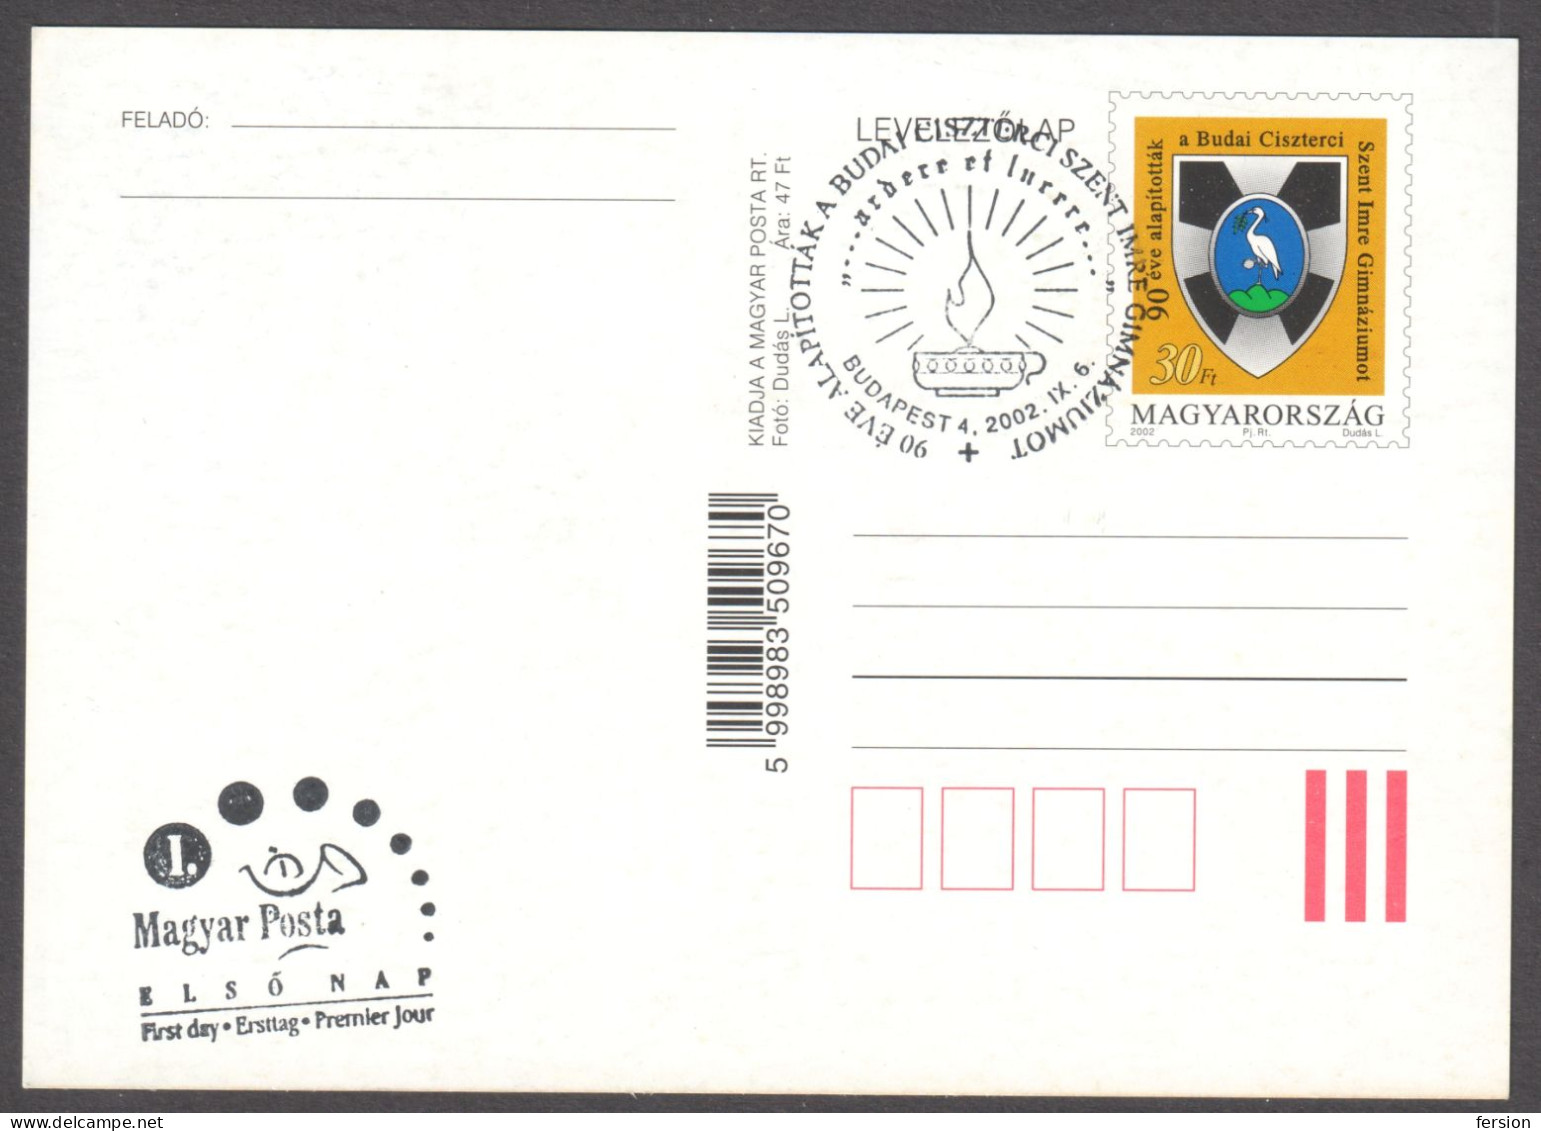 Cistercian Order Gymnasium School 2002 HUNGARY Coat Of Arms Stork Bird STATIONERY POSTCARD Not Used FDC Christianity - Christendom